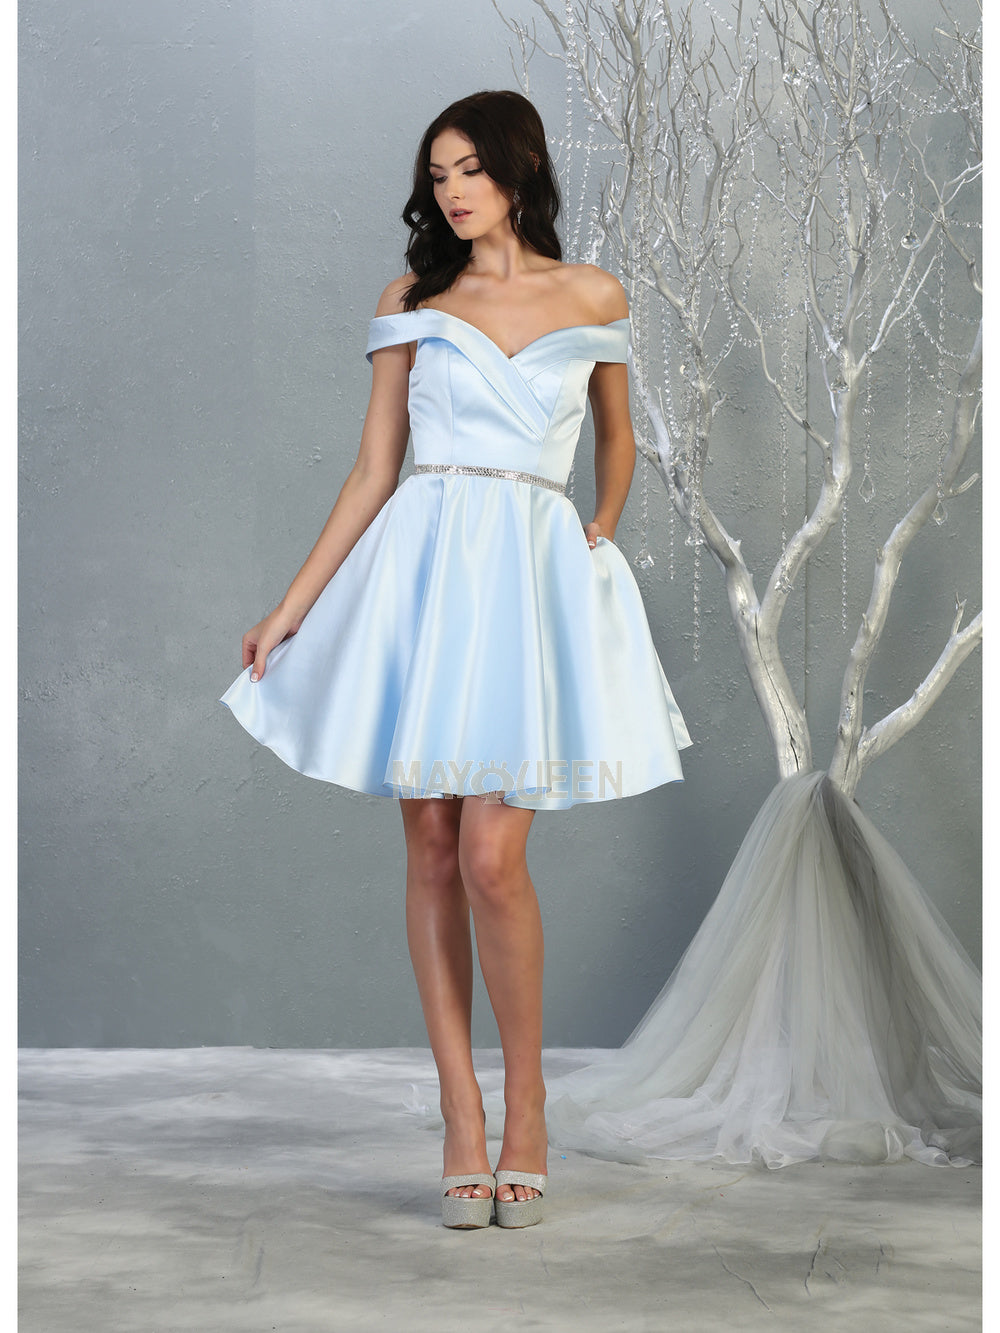 MQ 1815 - Off the Shoulder Satin A-Line Homecoming Dress with Beaded Belt & Pockets Homecoming Mayqueen 2 Baby Blue 